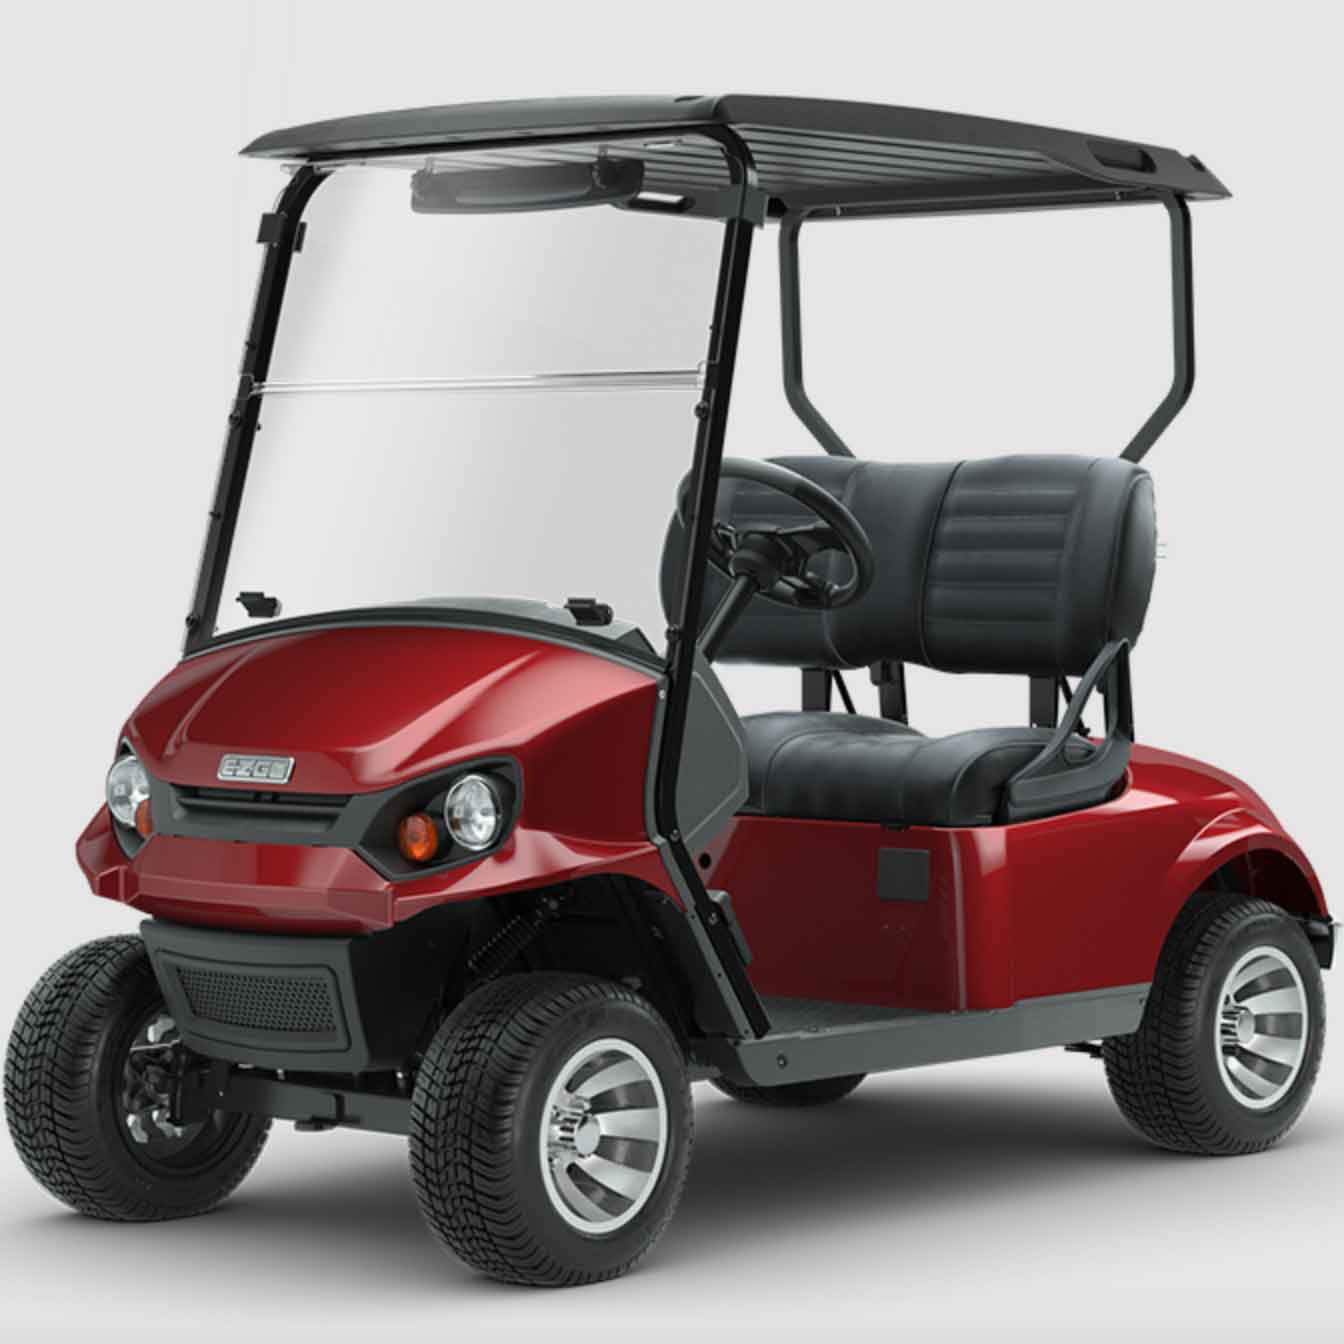 Best electric golf carts 2023: Our Picks